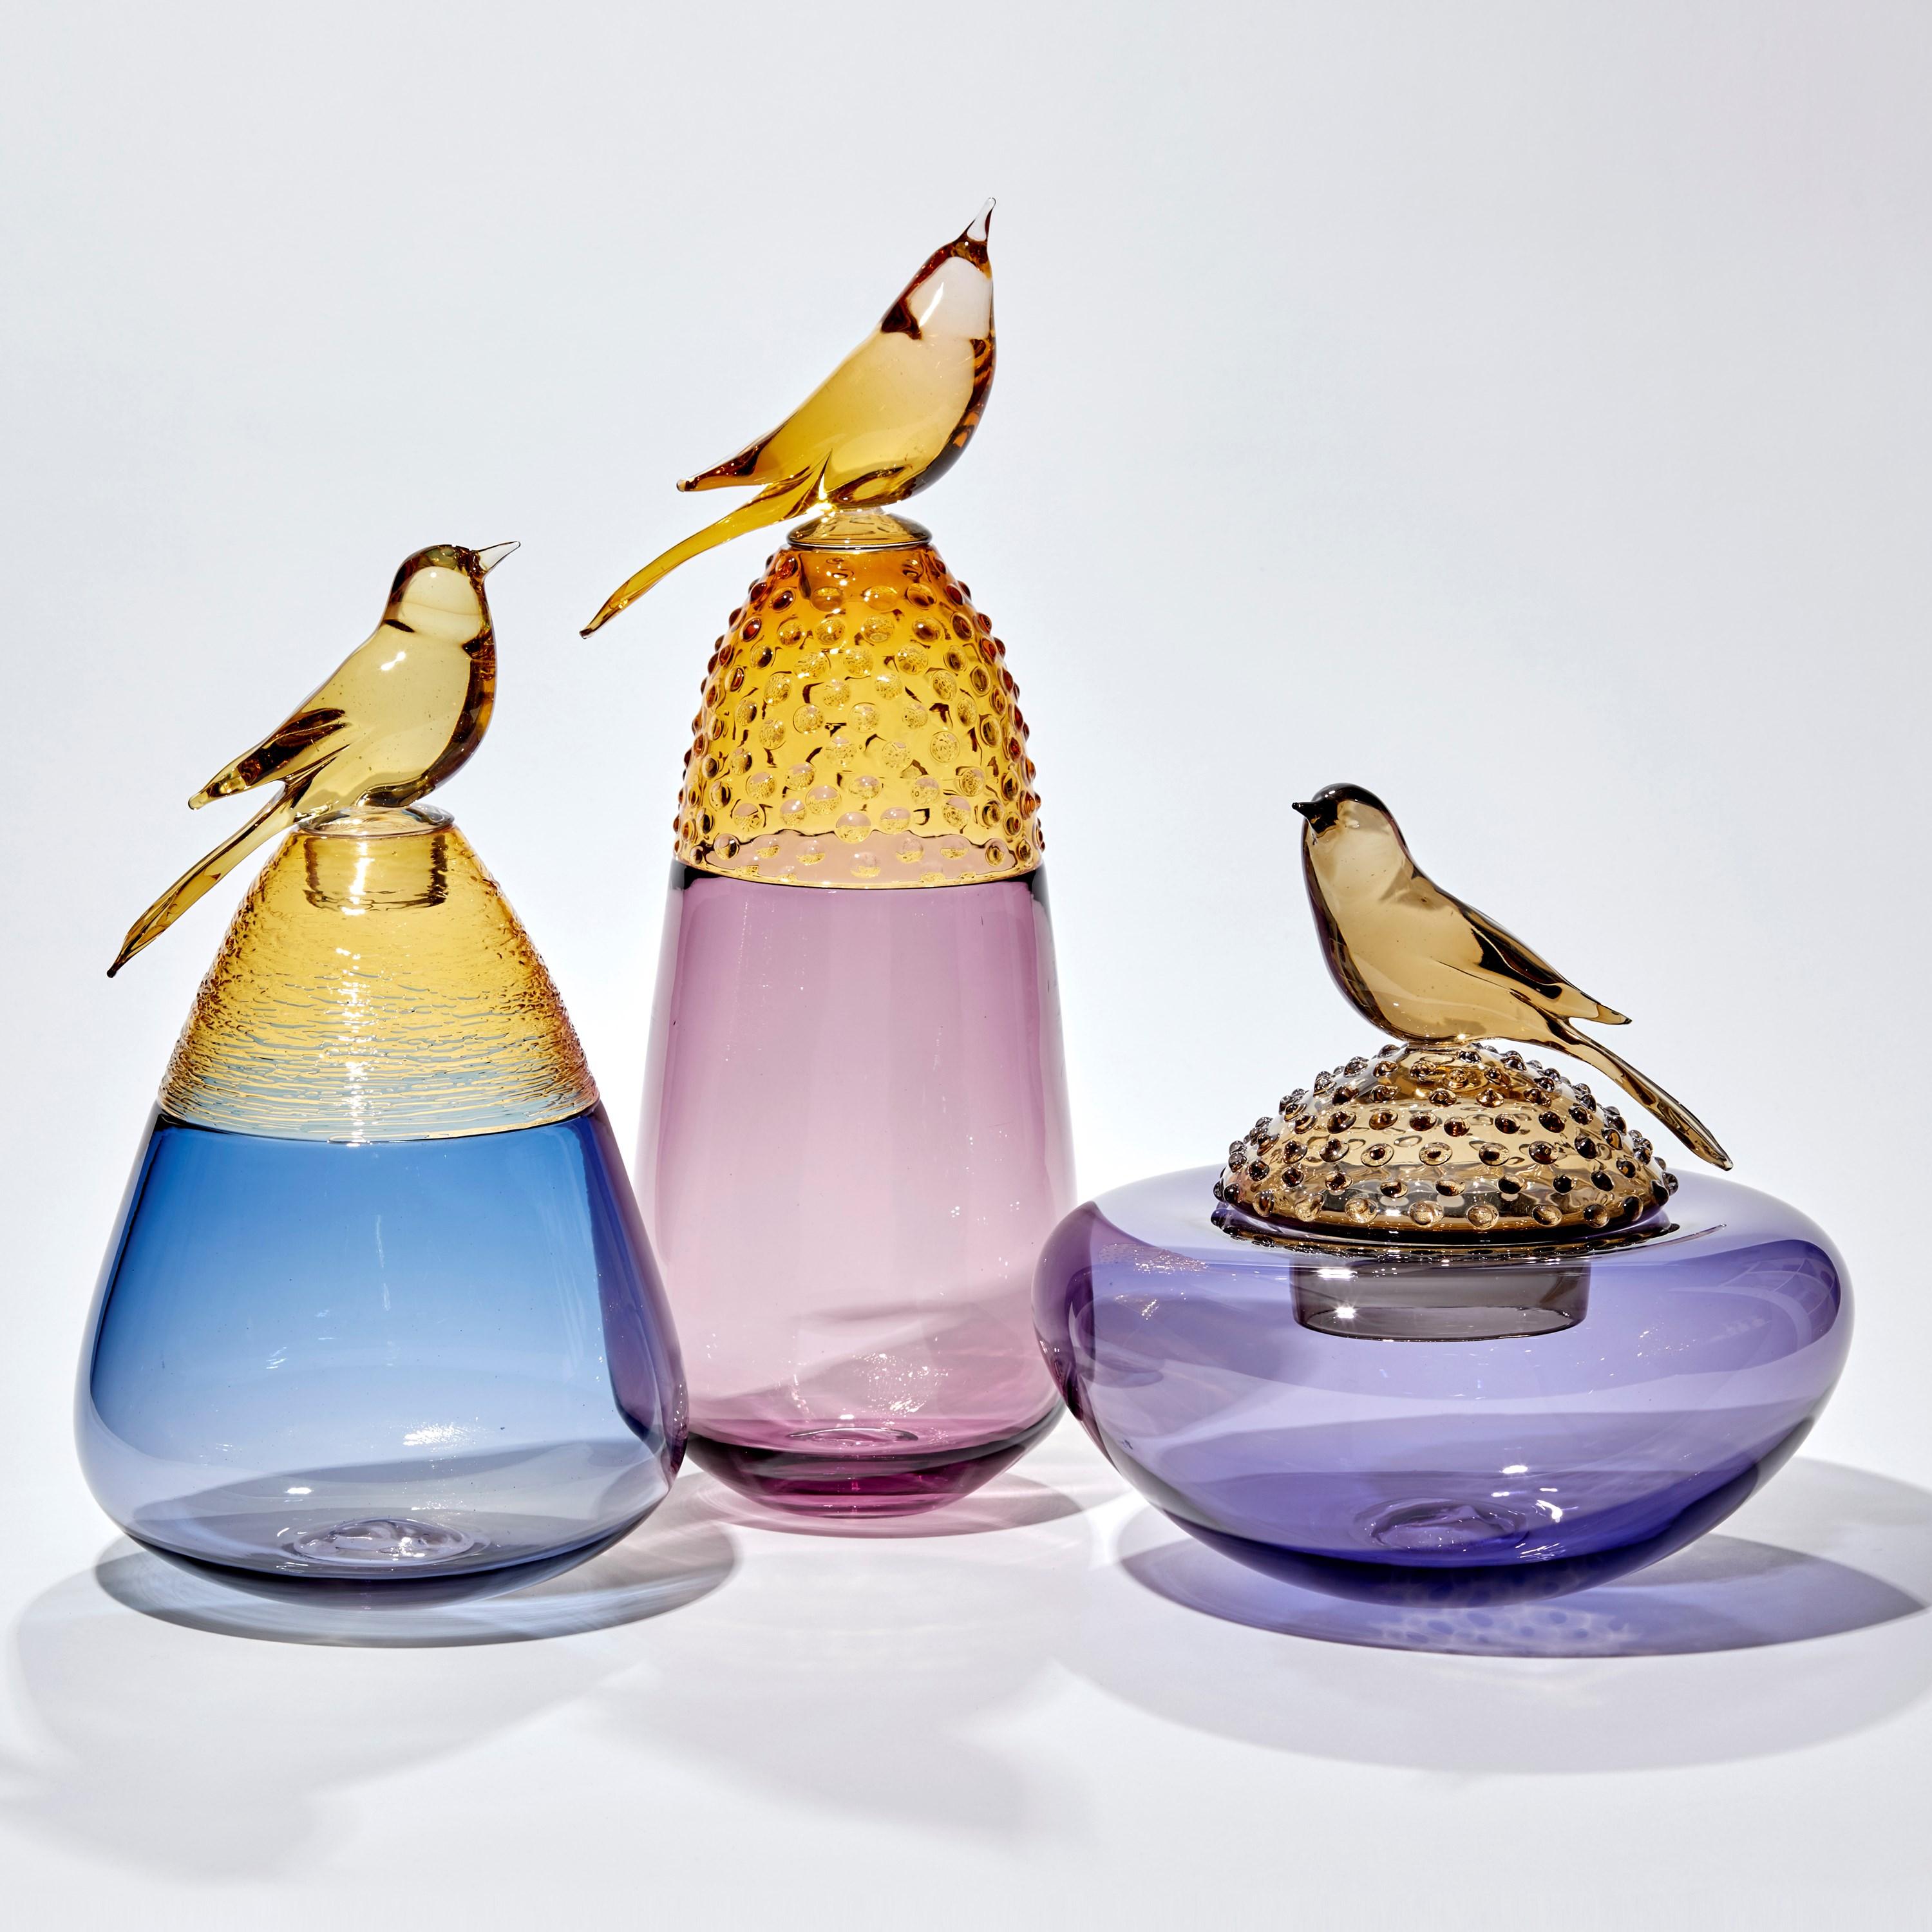 French All about Birds XIII, a Blue & Amber Glass Sculpture with Bird by Julie Johnson